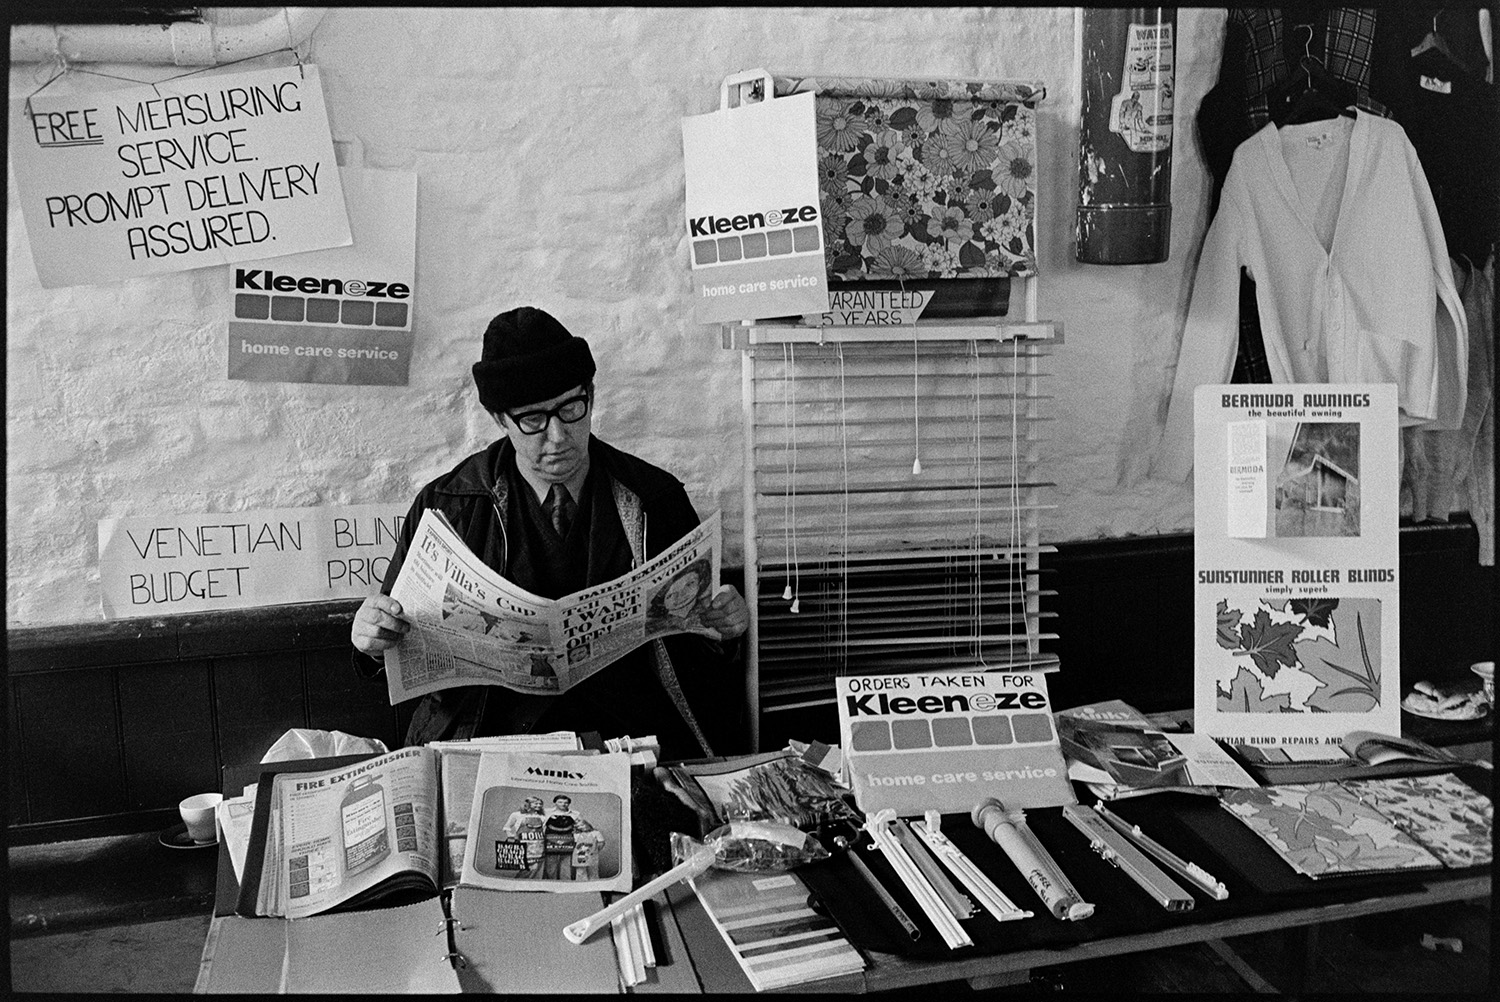 Pannier market, venetian blind stall, Kleeneze products. 
[A man running a stall selling venetian blinds and Kleeneze items at Bideford Pannier Market. He is sat behind the stall reading the Daily Express newspaper.]